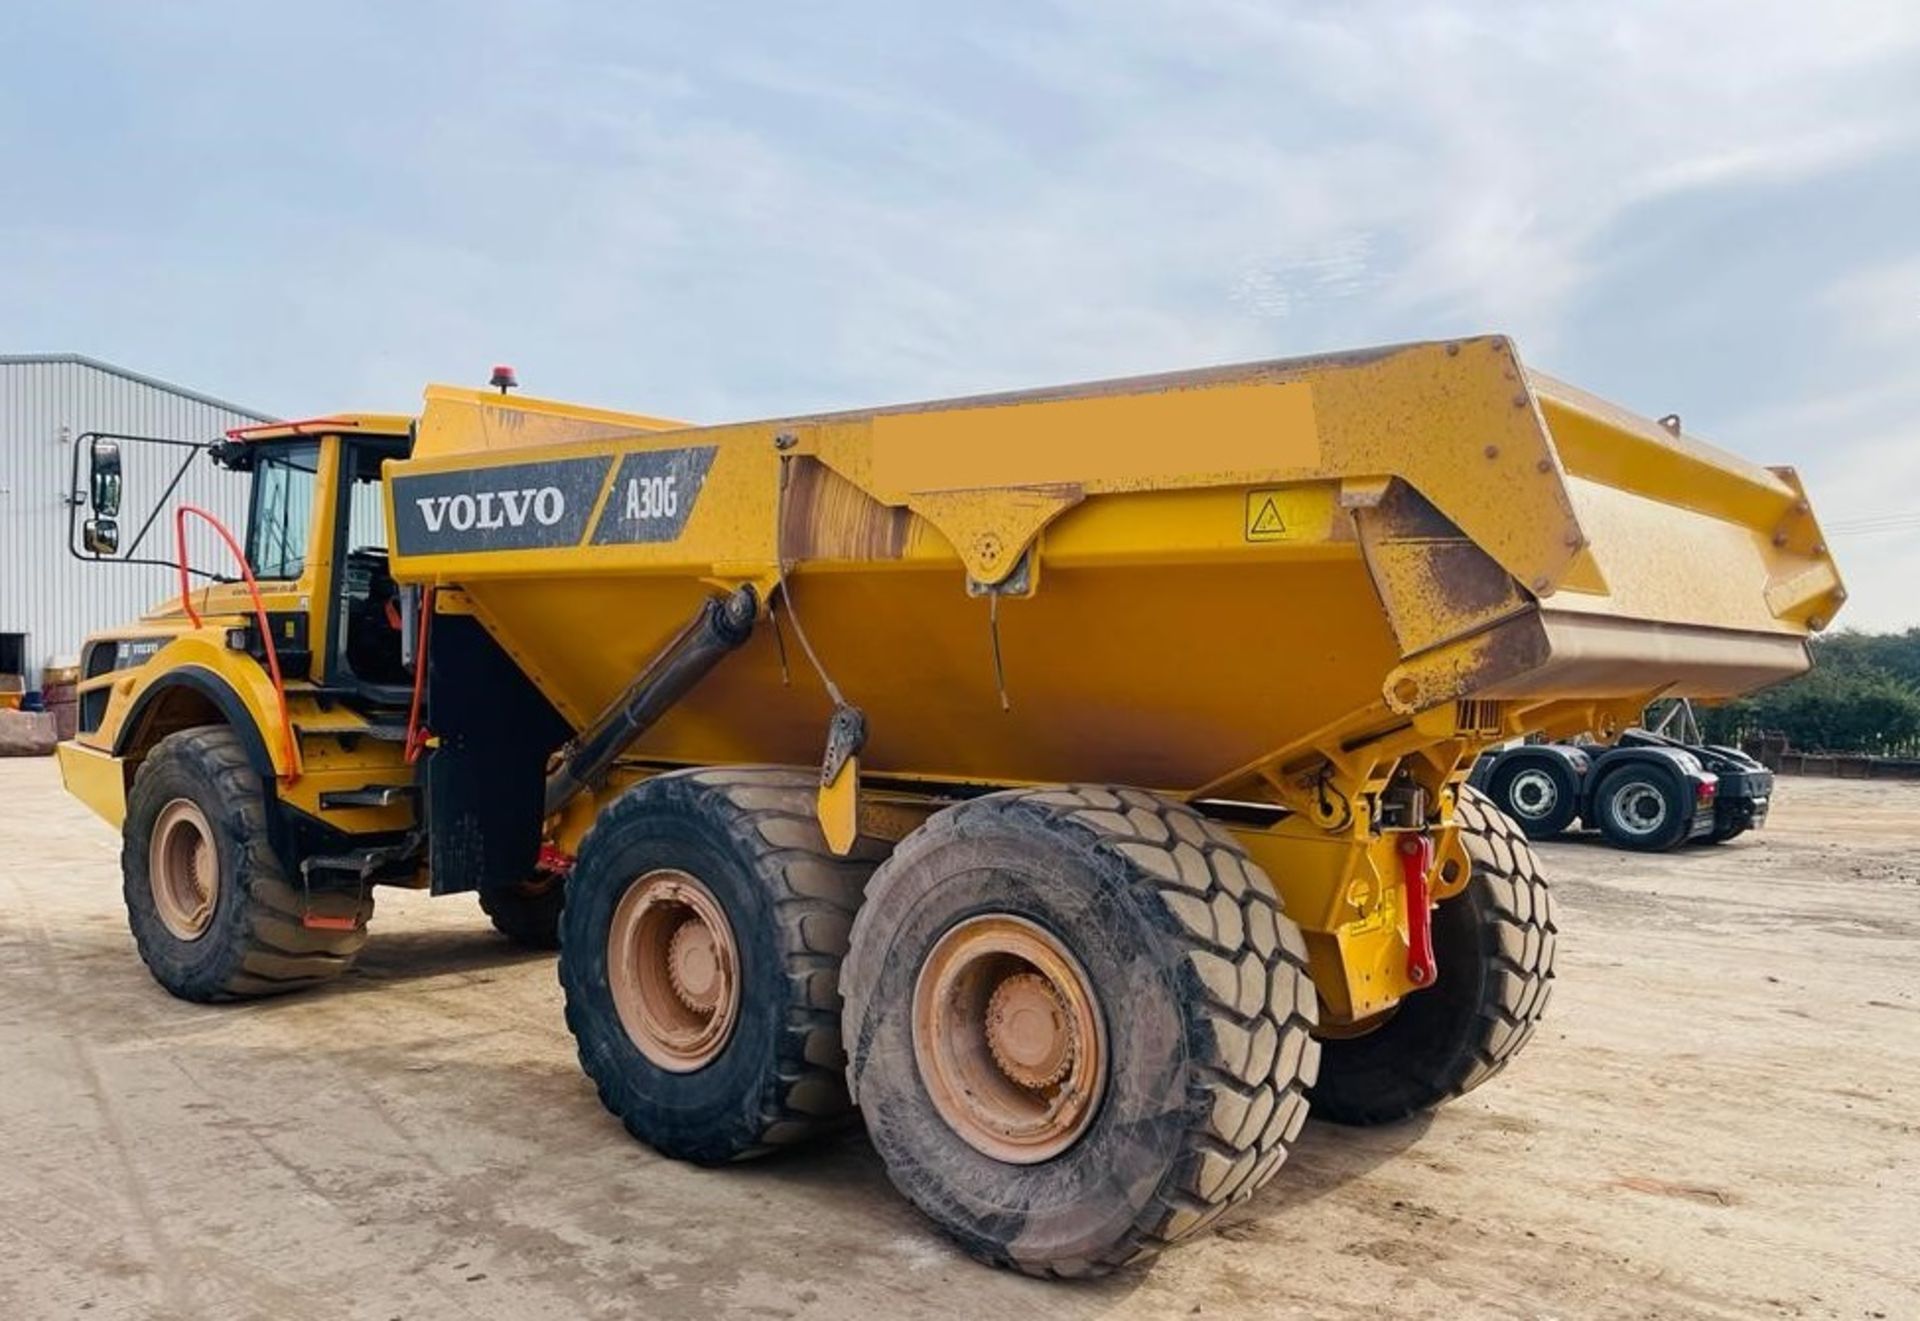 2021 - VOLVO A 30 G DUMP TRUCK - Image 3 of 20